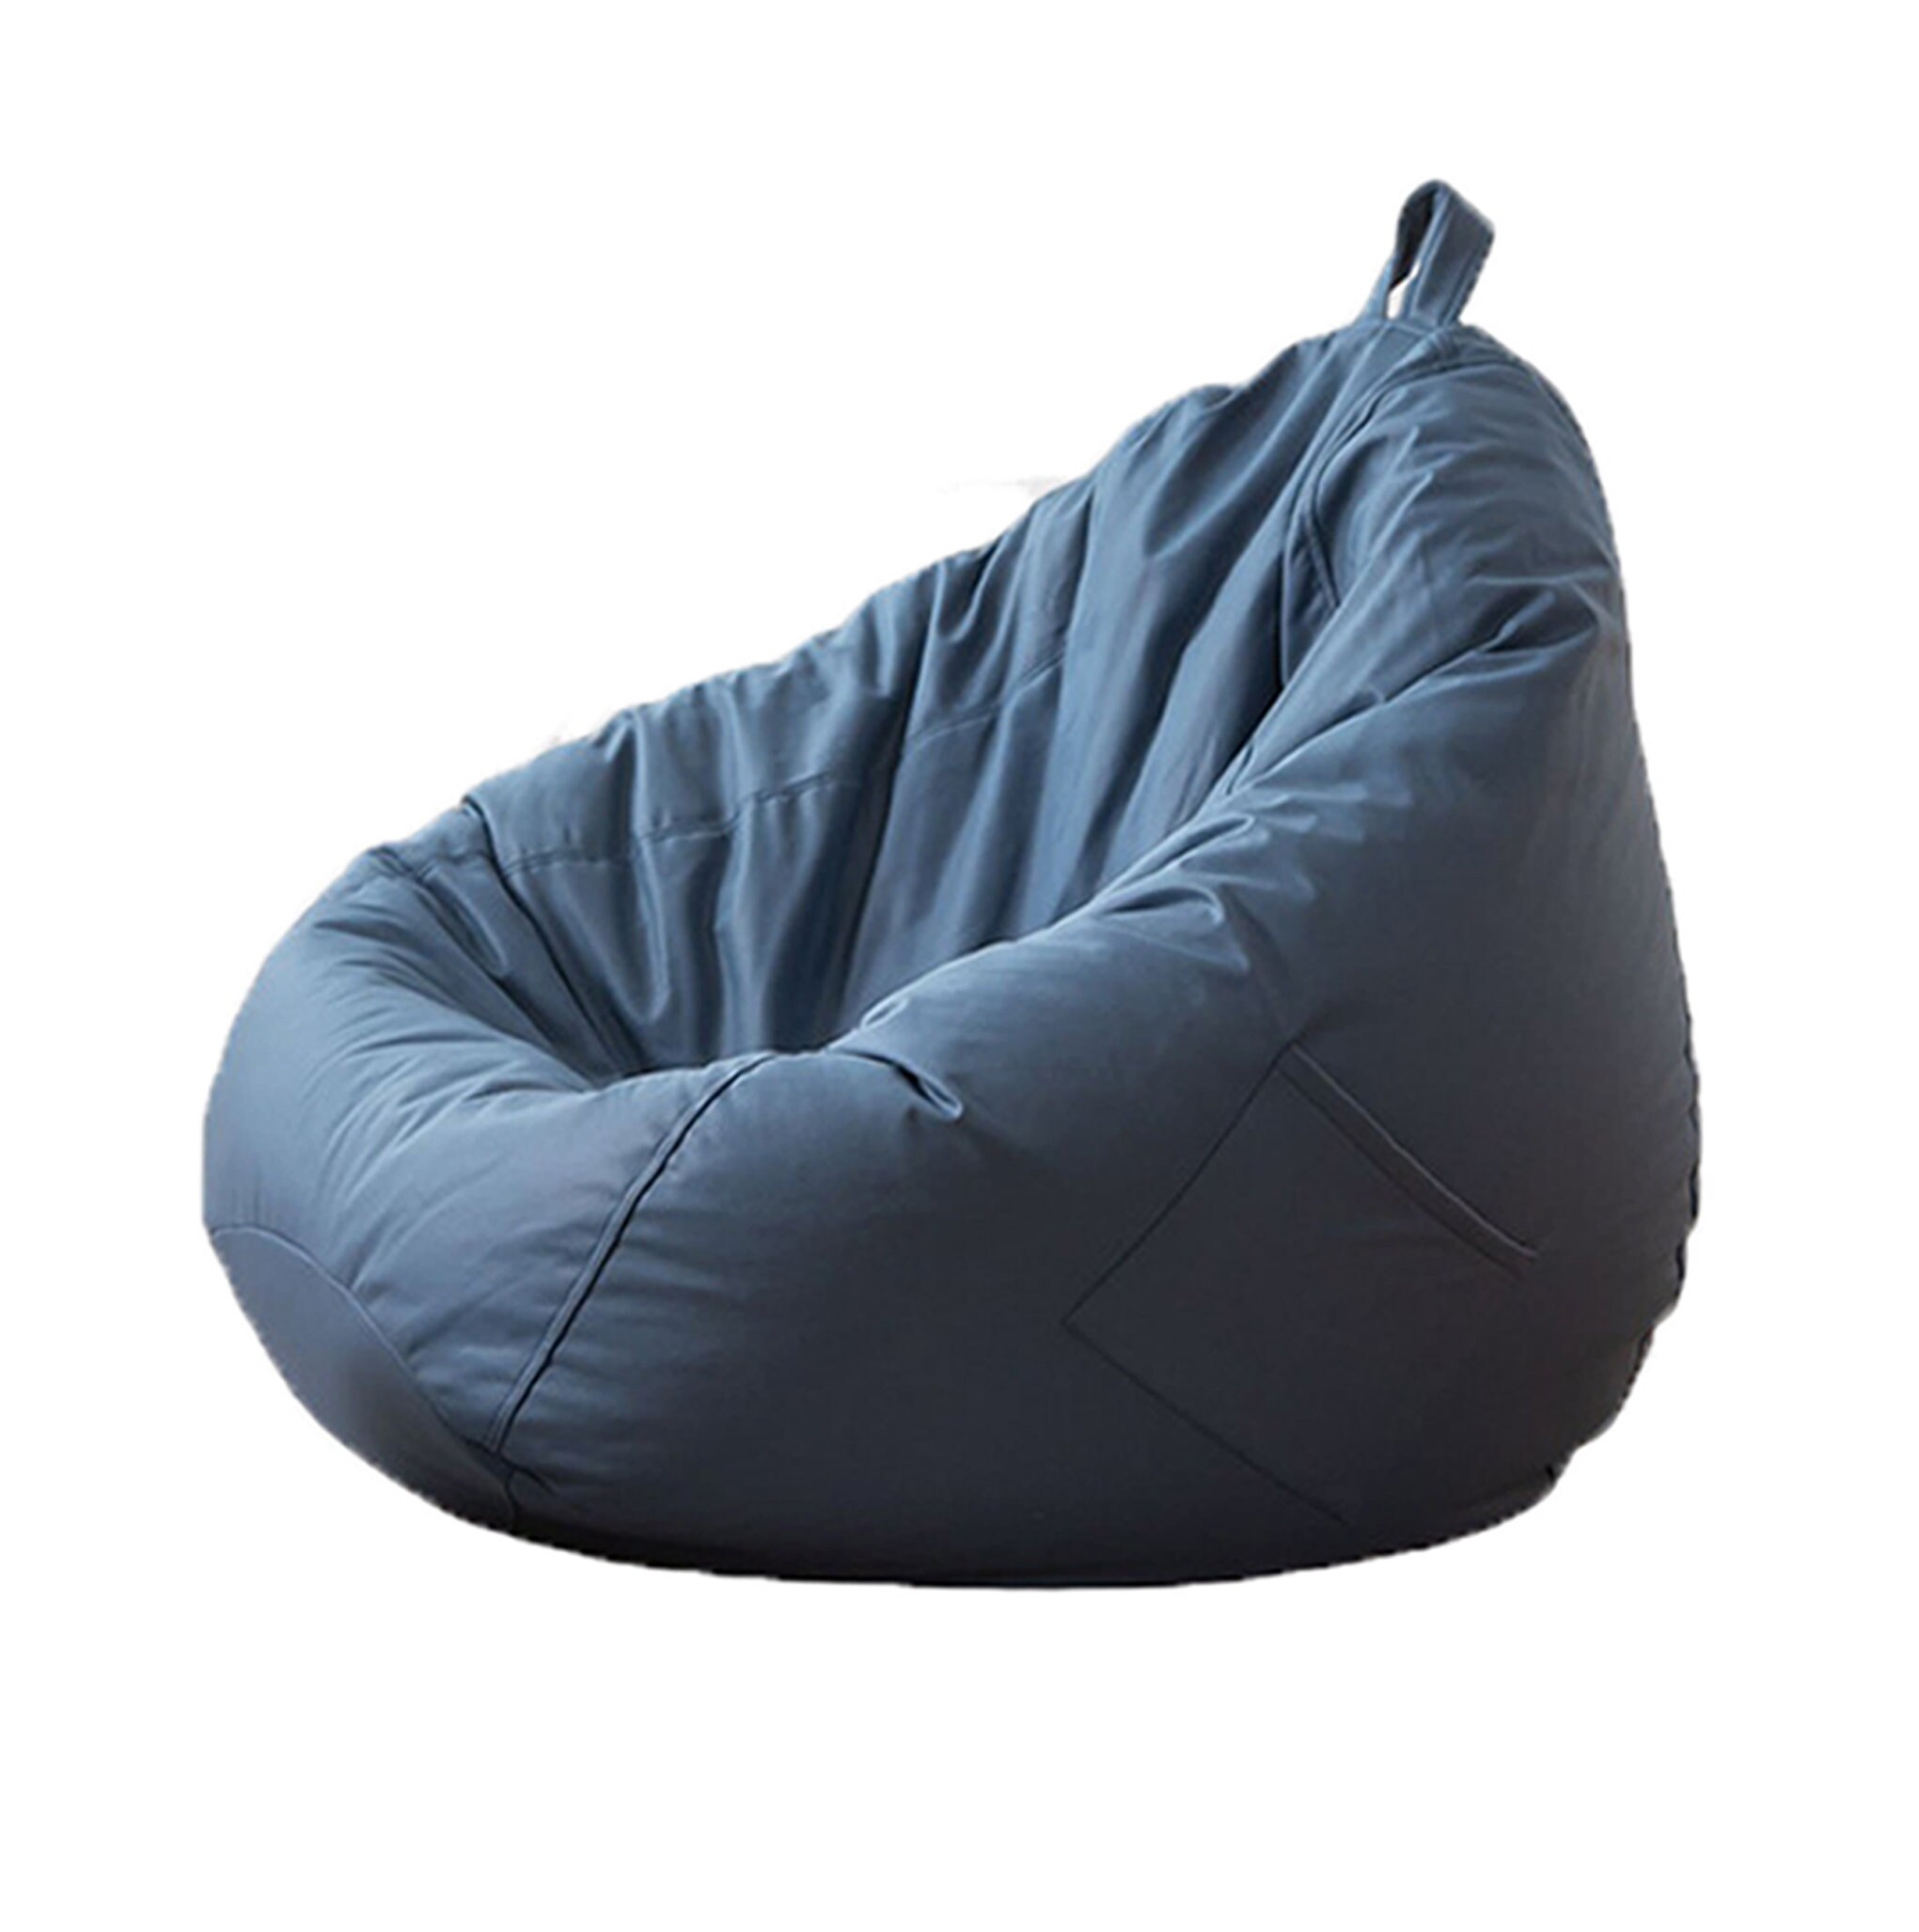 Couchette® Bean Bag XXL Cover in Denim Blue (Without Fillers) – Home Decor  Lo